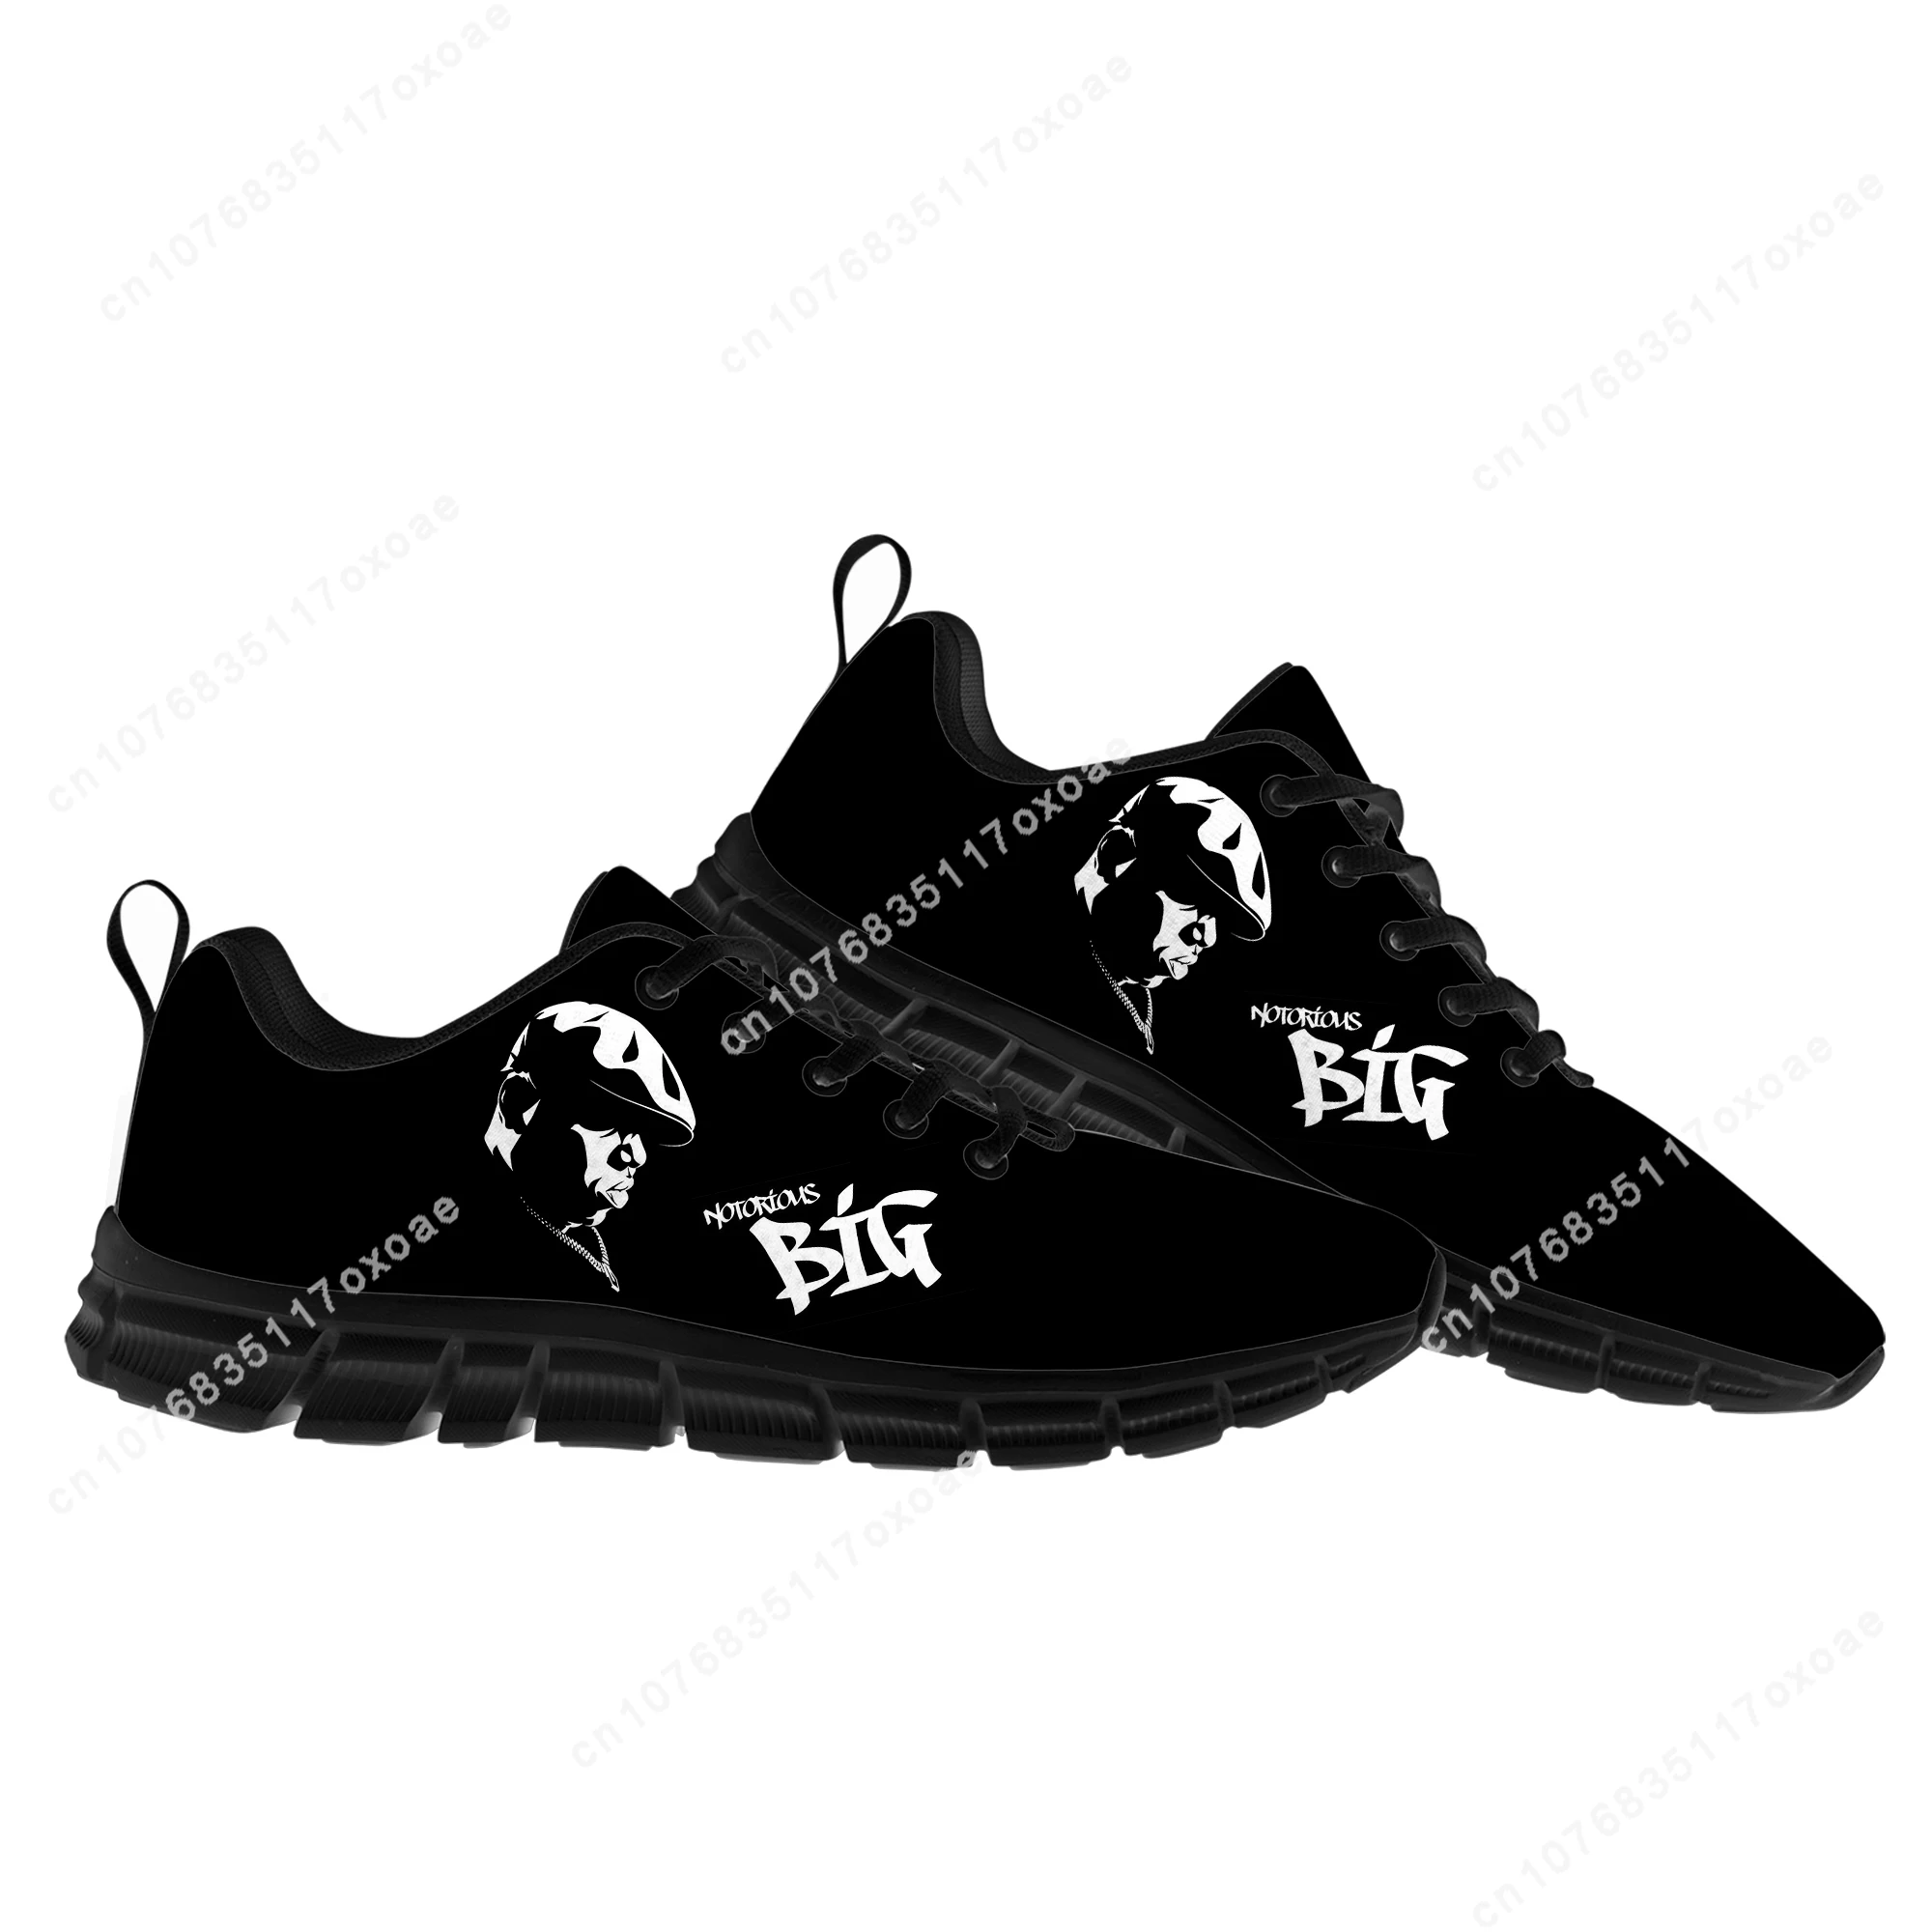 

The Notorious Big Sports Shoes Mens Women Teenager Kids Children Sneakers High Quality Biggie Smalls Casual Sneaker Custom Shoes